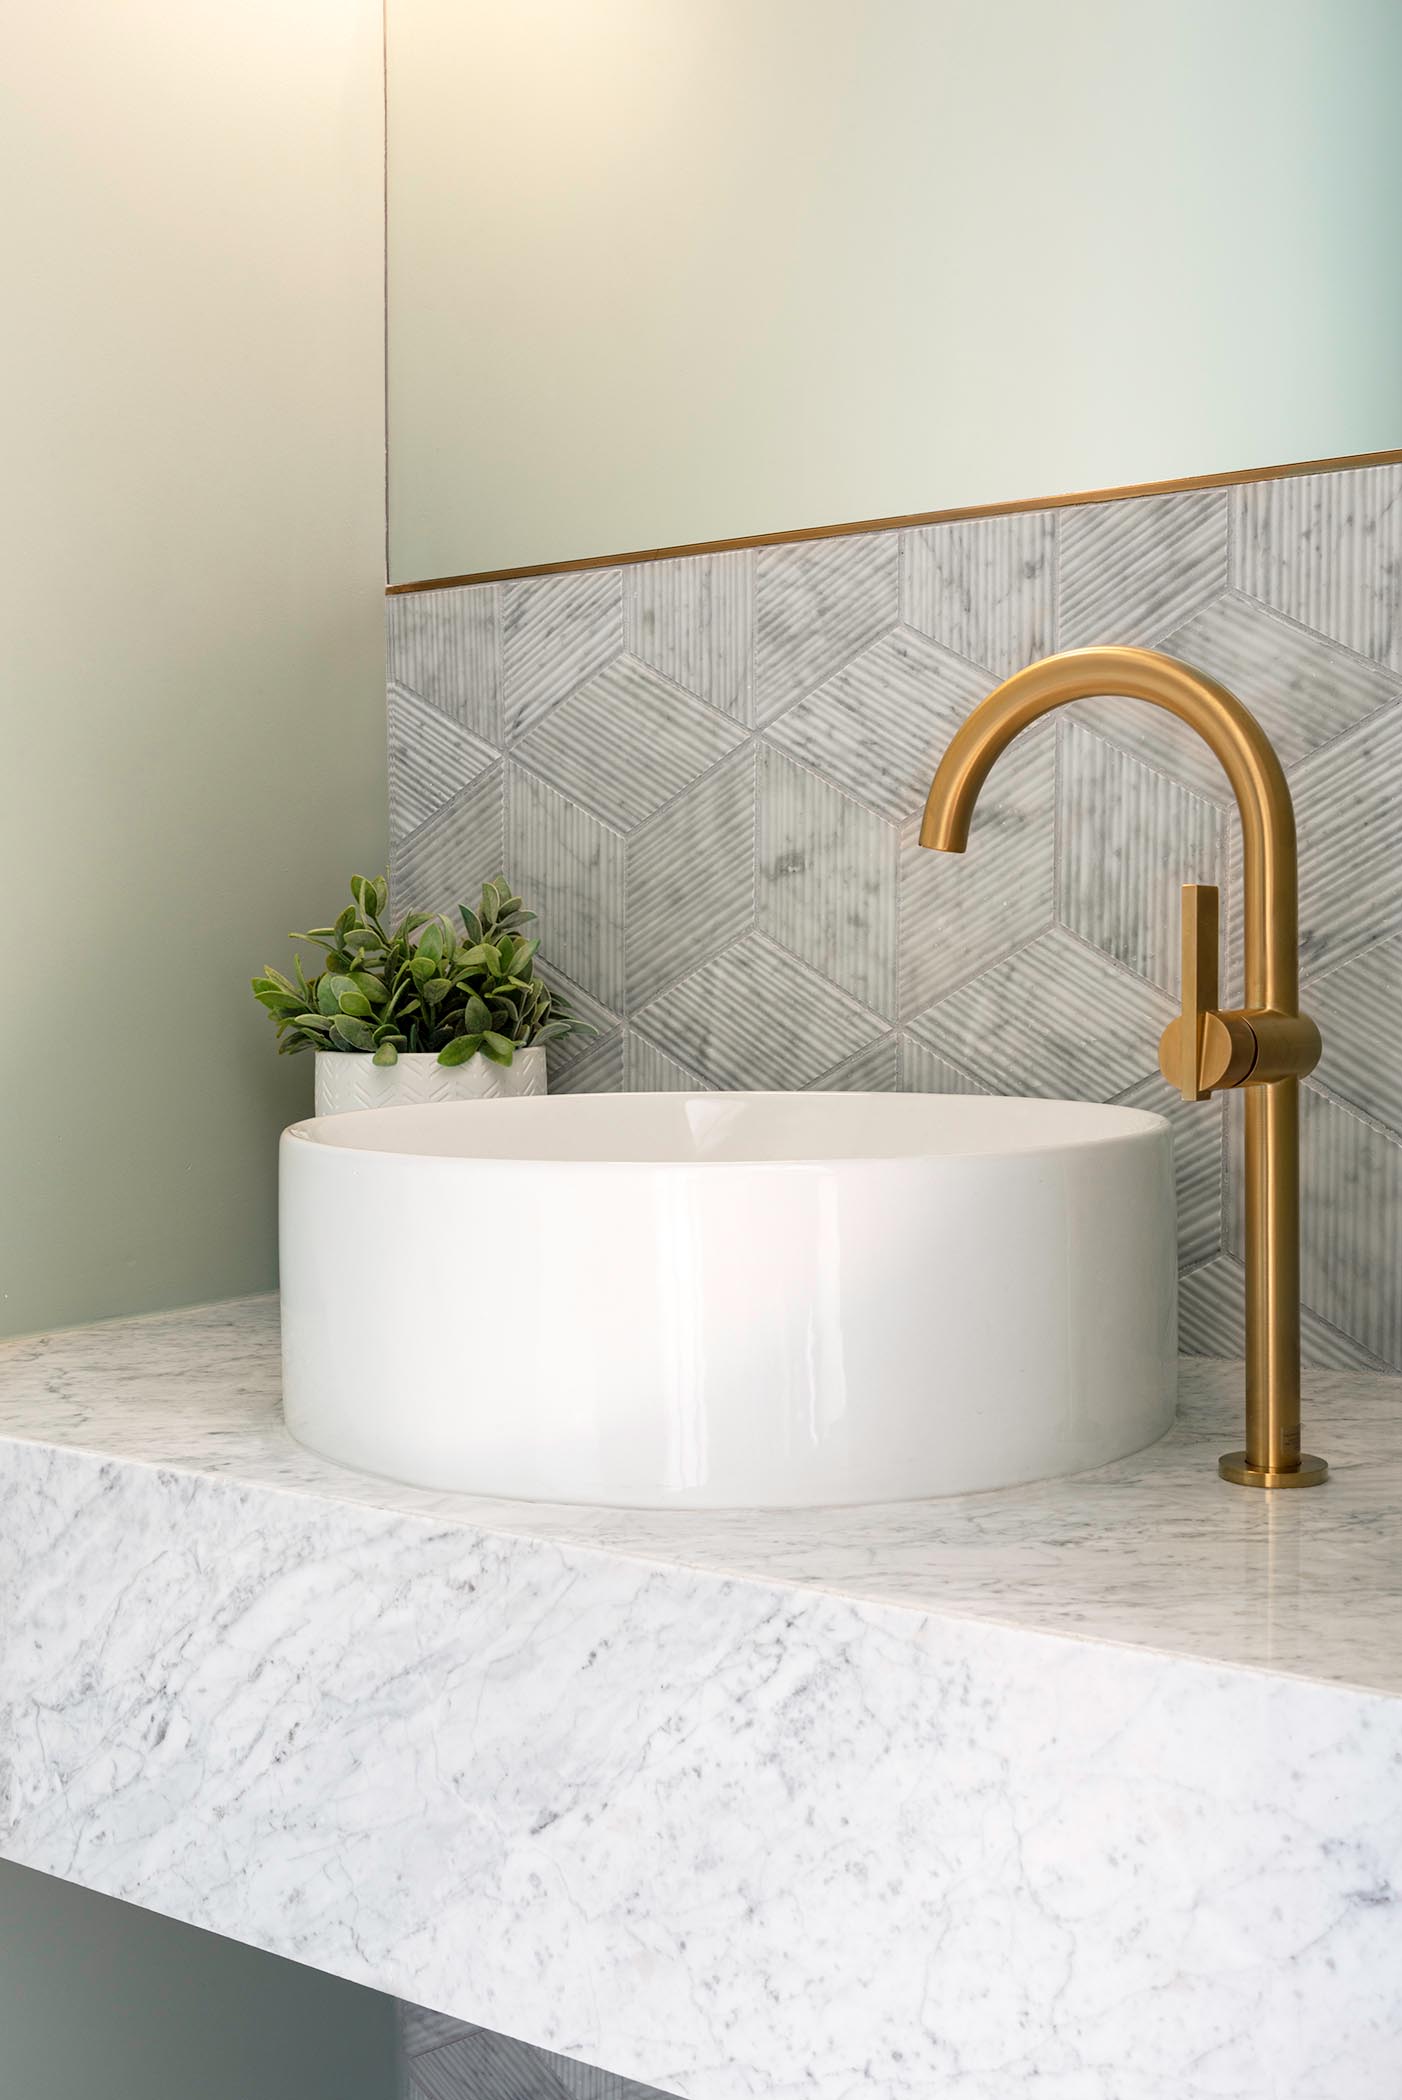 In this small but modern powder room, tile with a textural bamboo-like finish covers the wall, while a floating vanity is topped with a round white vessel sink and bronze accents.